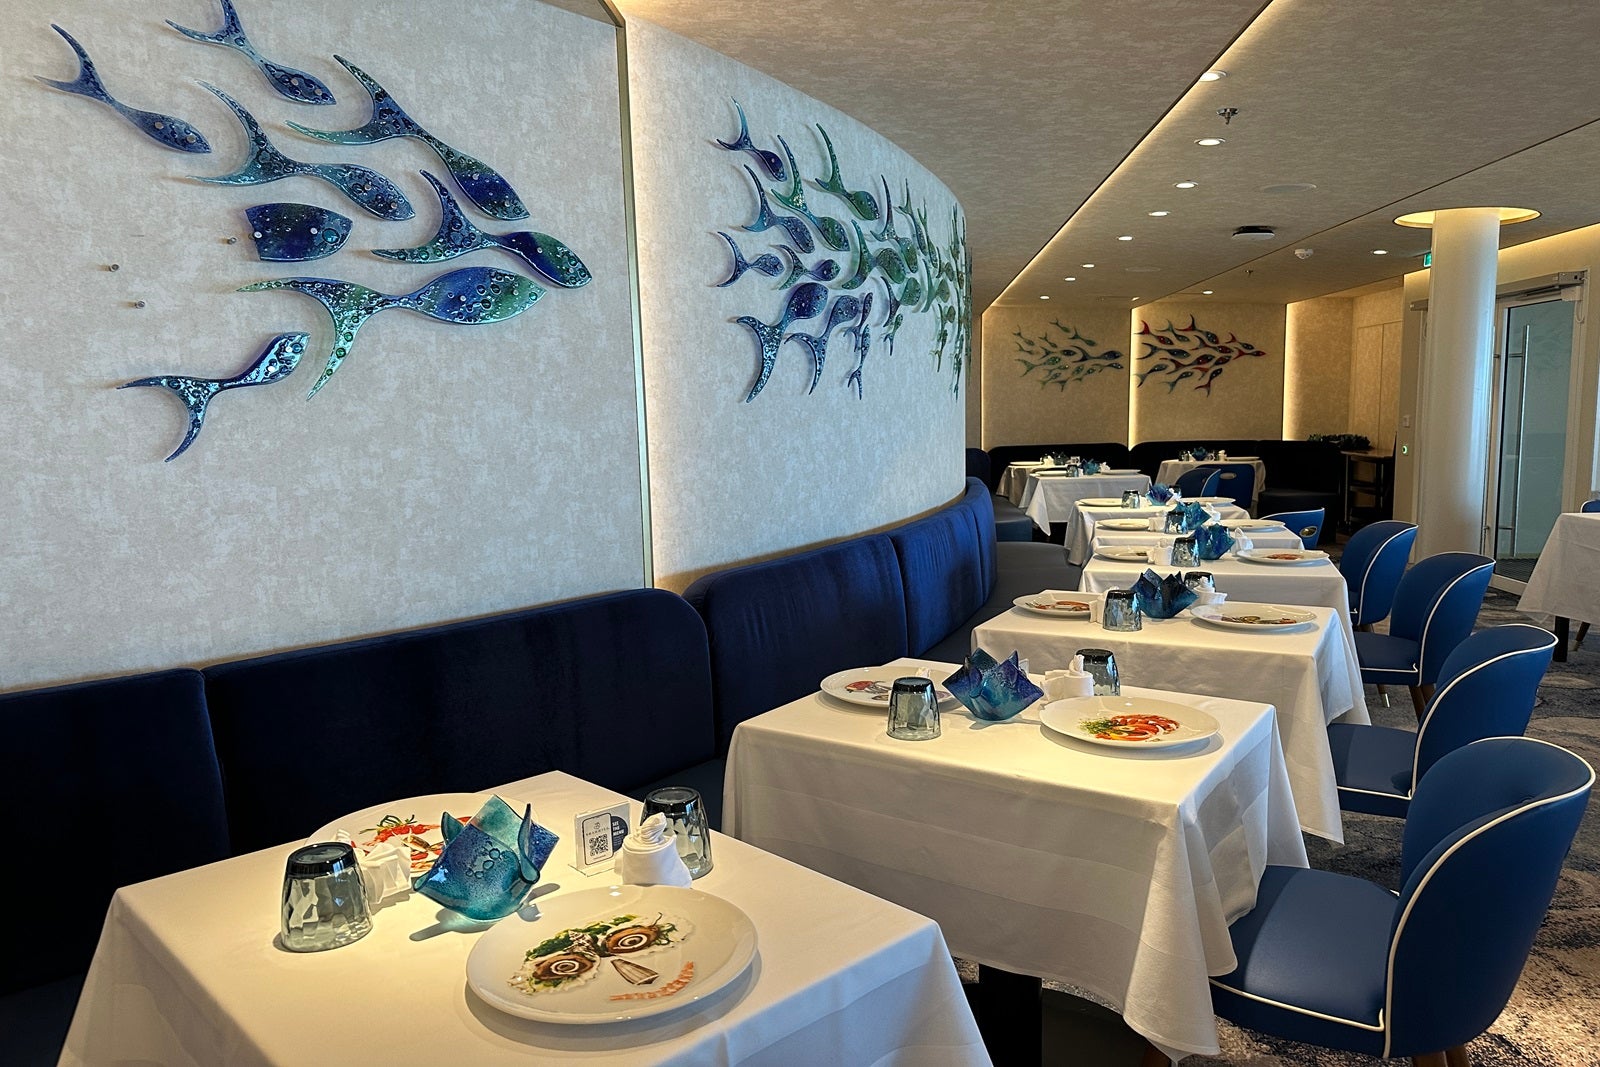 A restaurant with tables set around a curved wall that's adorned with blue glass fish